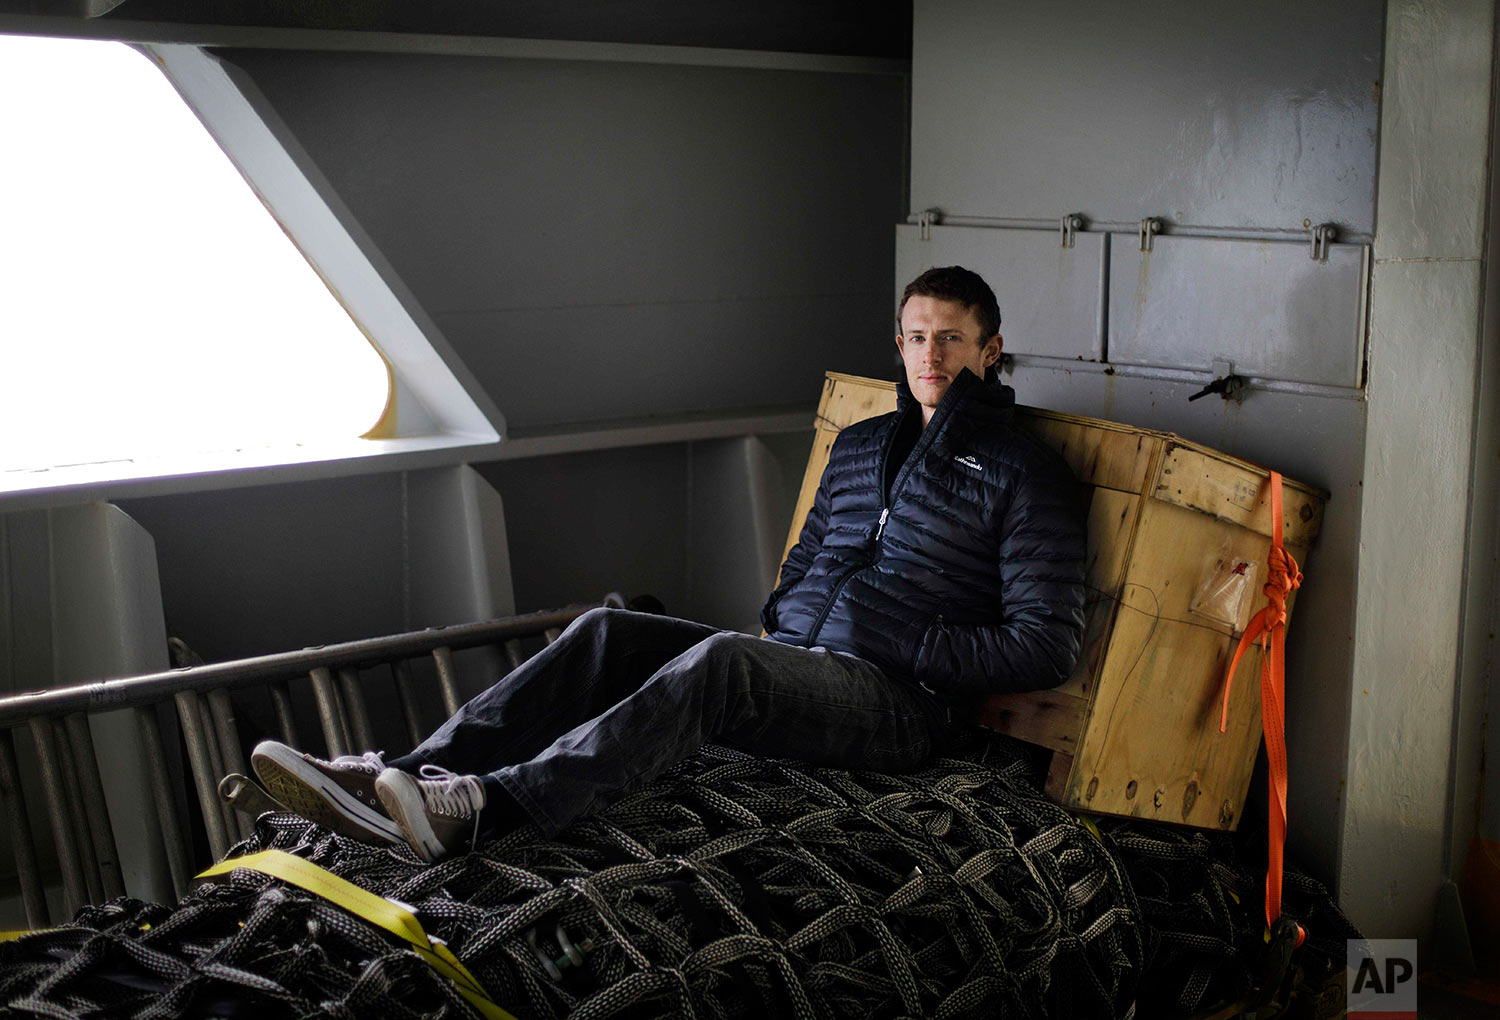  Polar maritime lawyer Scott Joblin, 30, sits for a portrait aboard the Finnish icebreaker MSV Nordica as it sails north in the Bering Sea toward the Arctic, Wednesday, July 12, 2017. "It's a chance to ground my research in real world context," said 